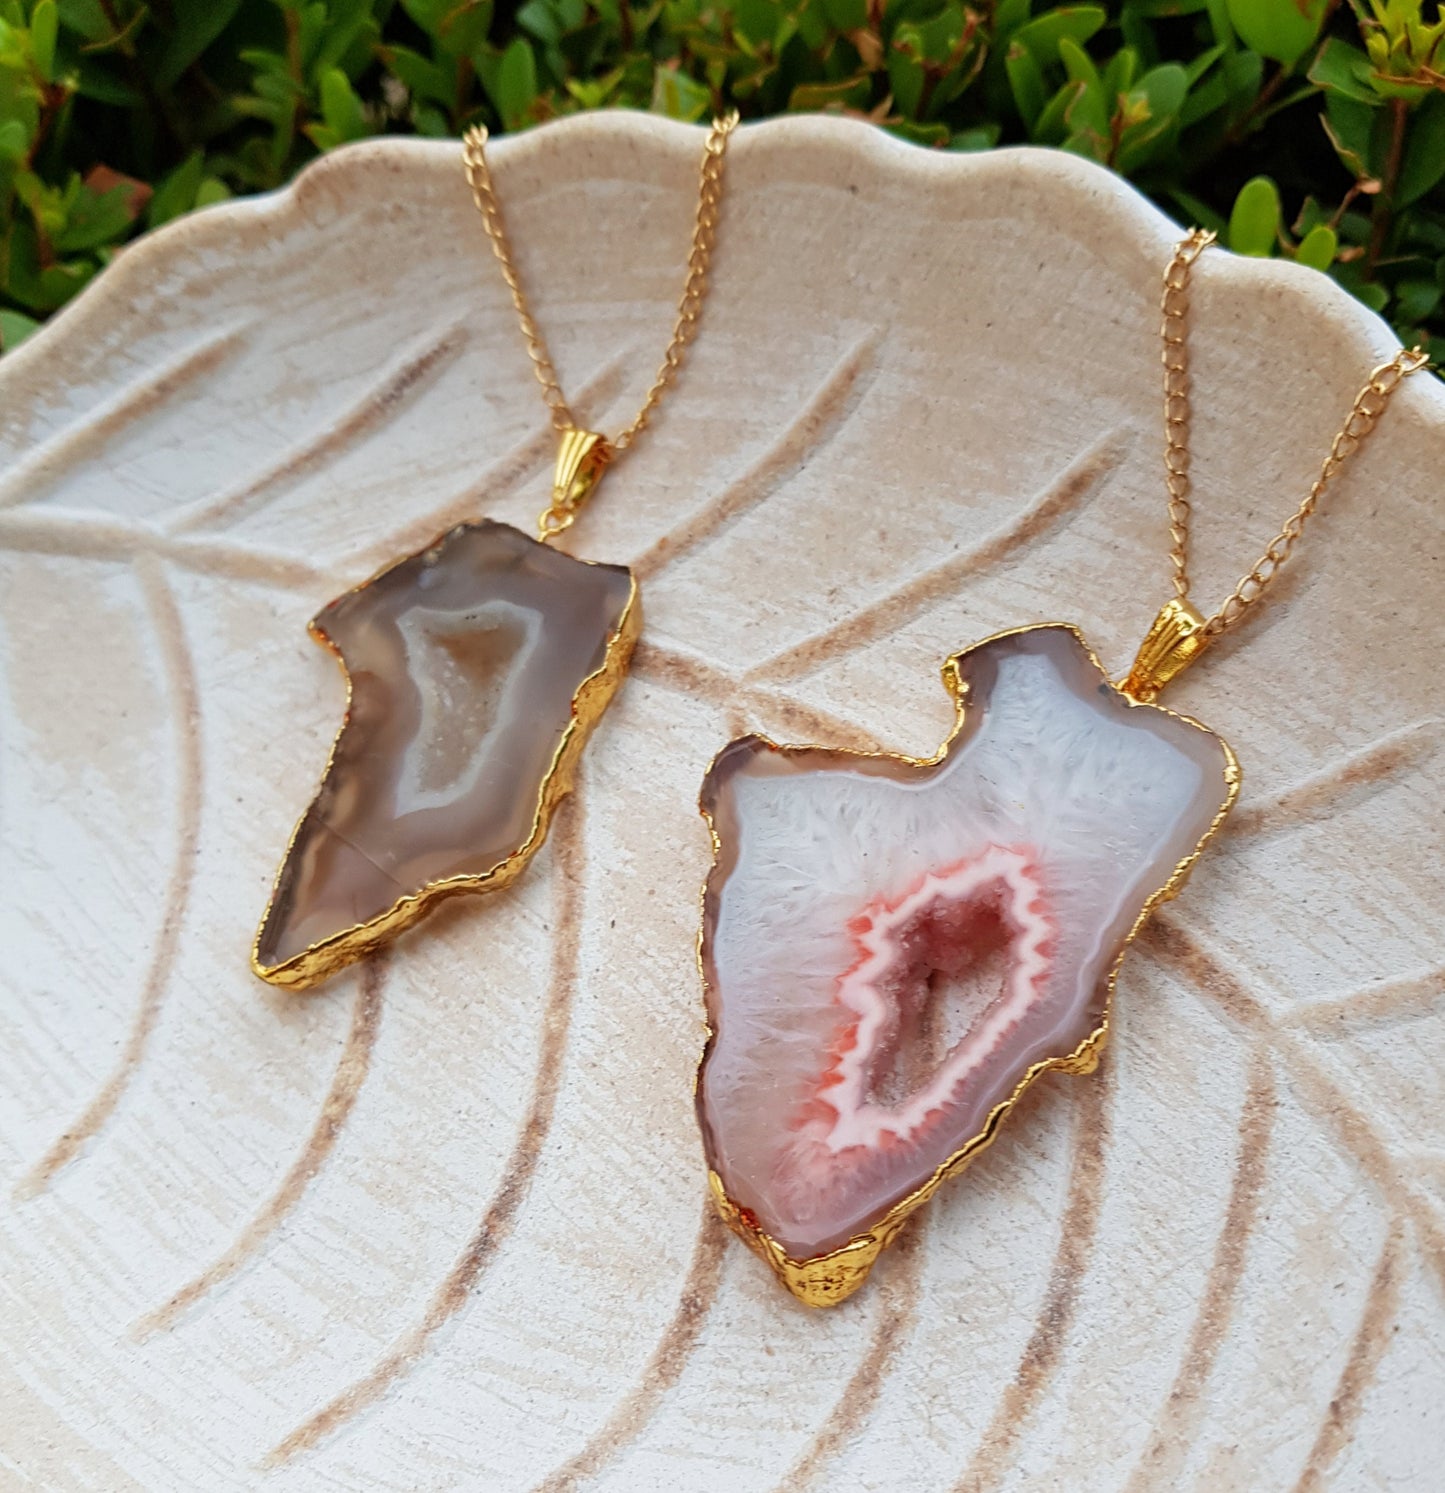 Big Druzy Agate Pendant Gold Plated Statement Pendant Boho Gemstone Necklace Unique Gift One Of A Kind Gift